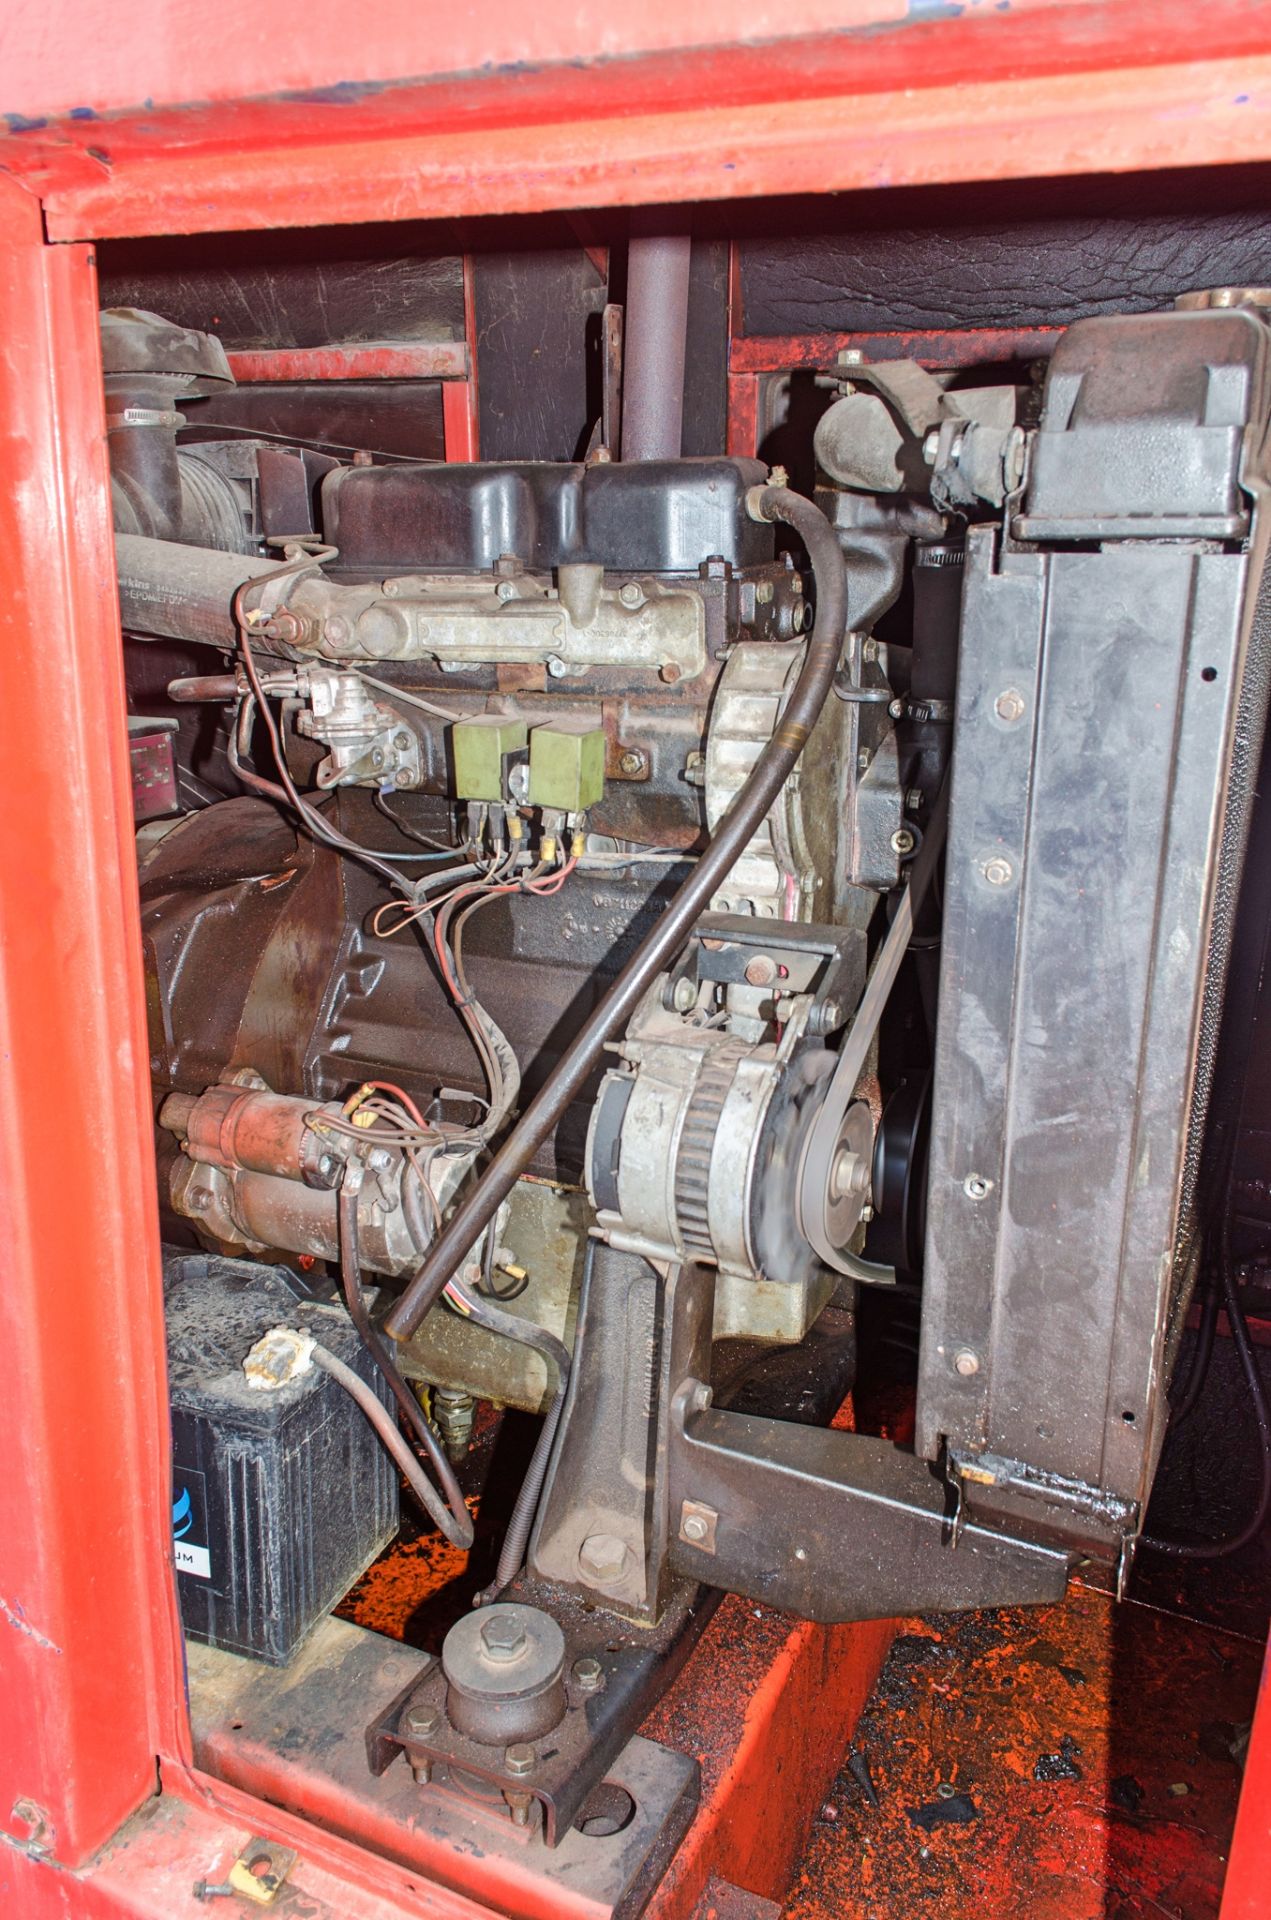 SMC G30 30 kva diesel driven generator S/N: G30092263 Recorded Hours: 8389 - Image 6 of 9